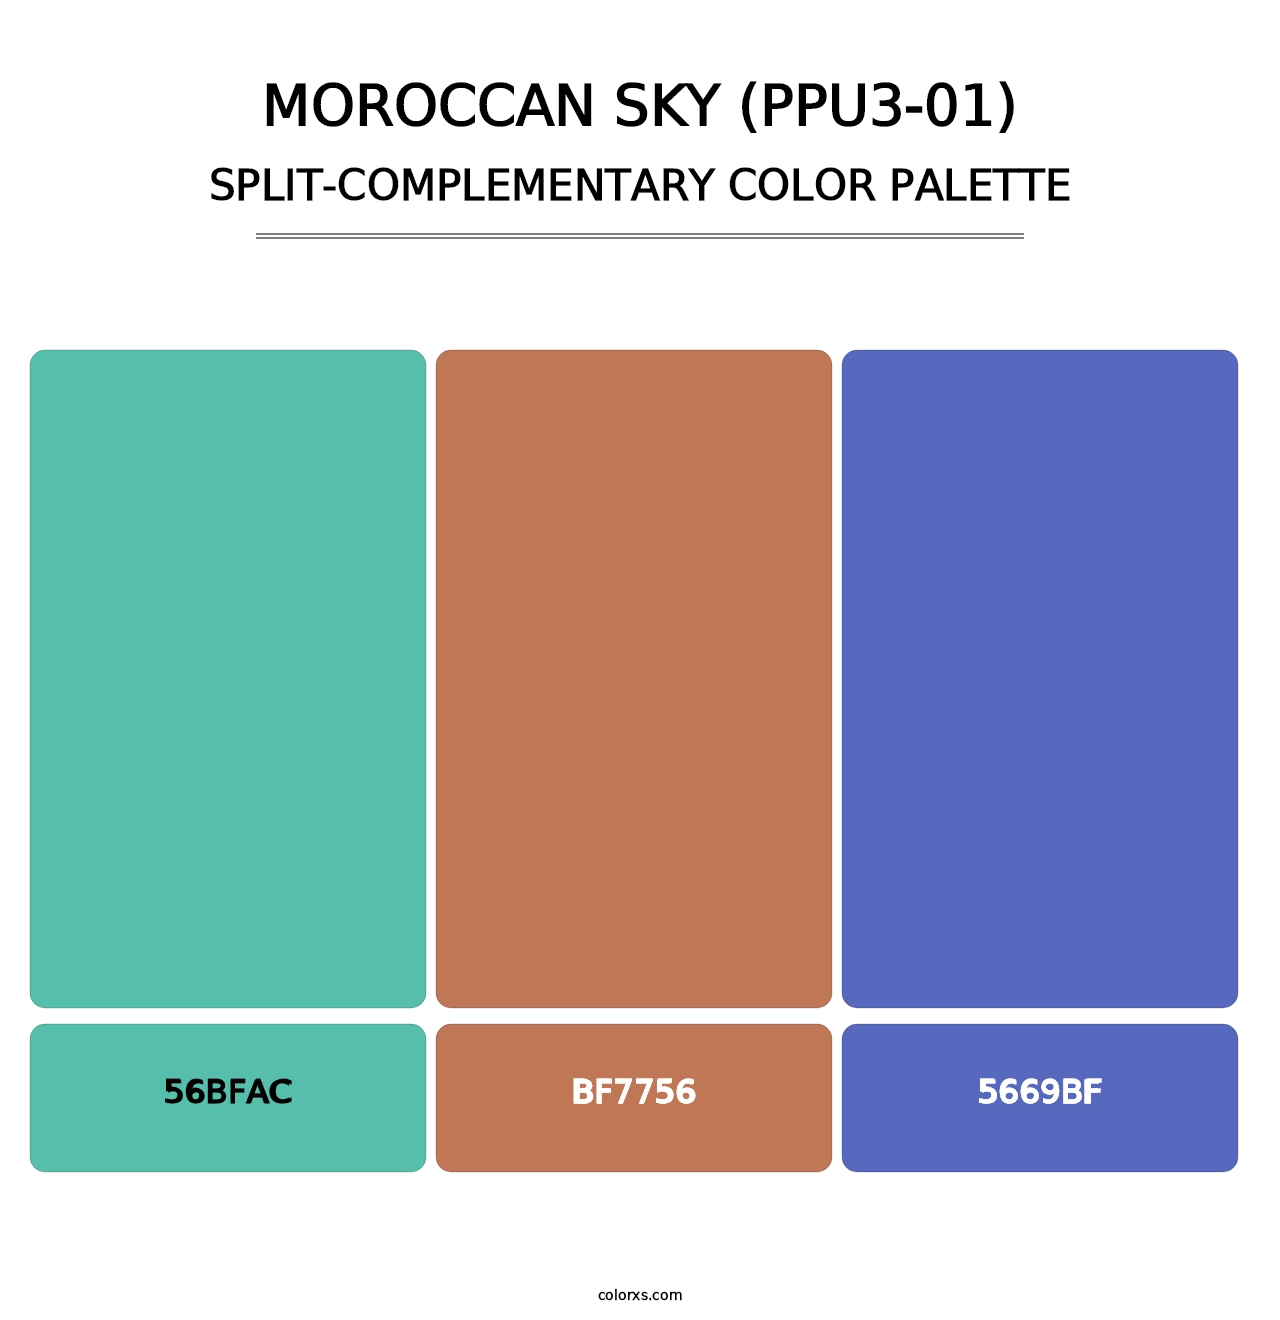 Moroccan Sky (PPU3-01) - Split-Complementary Color Palette